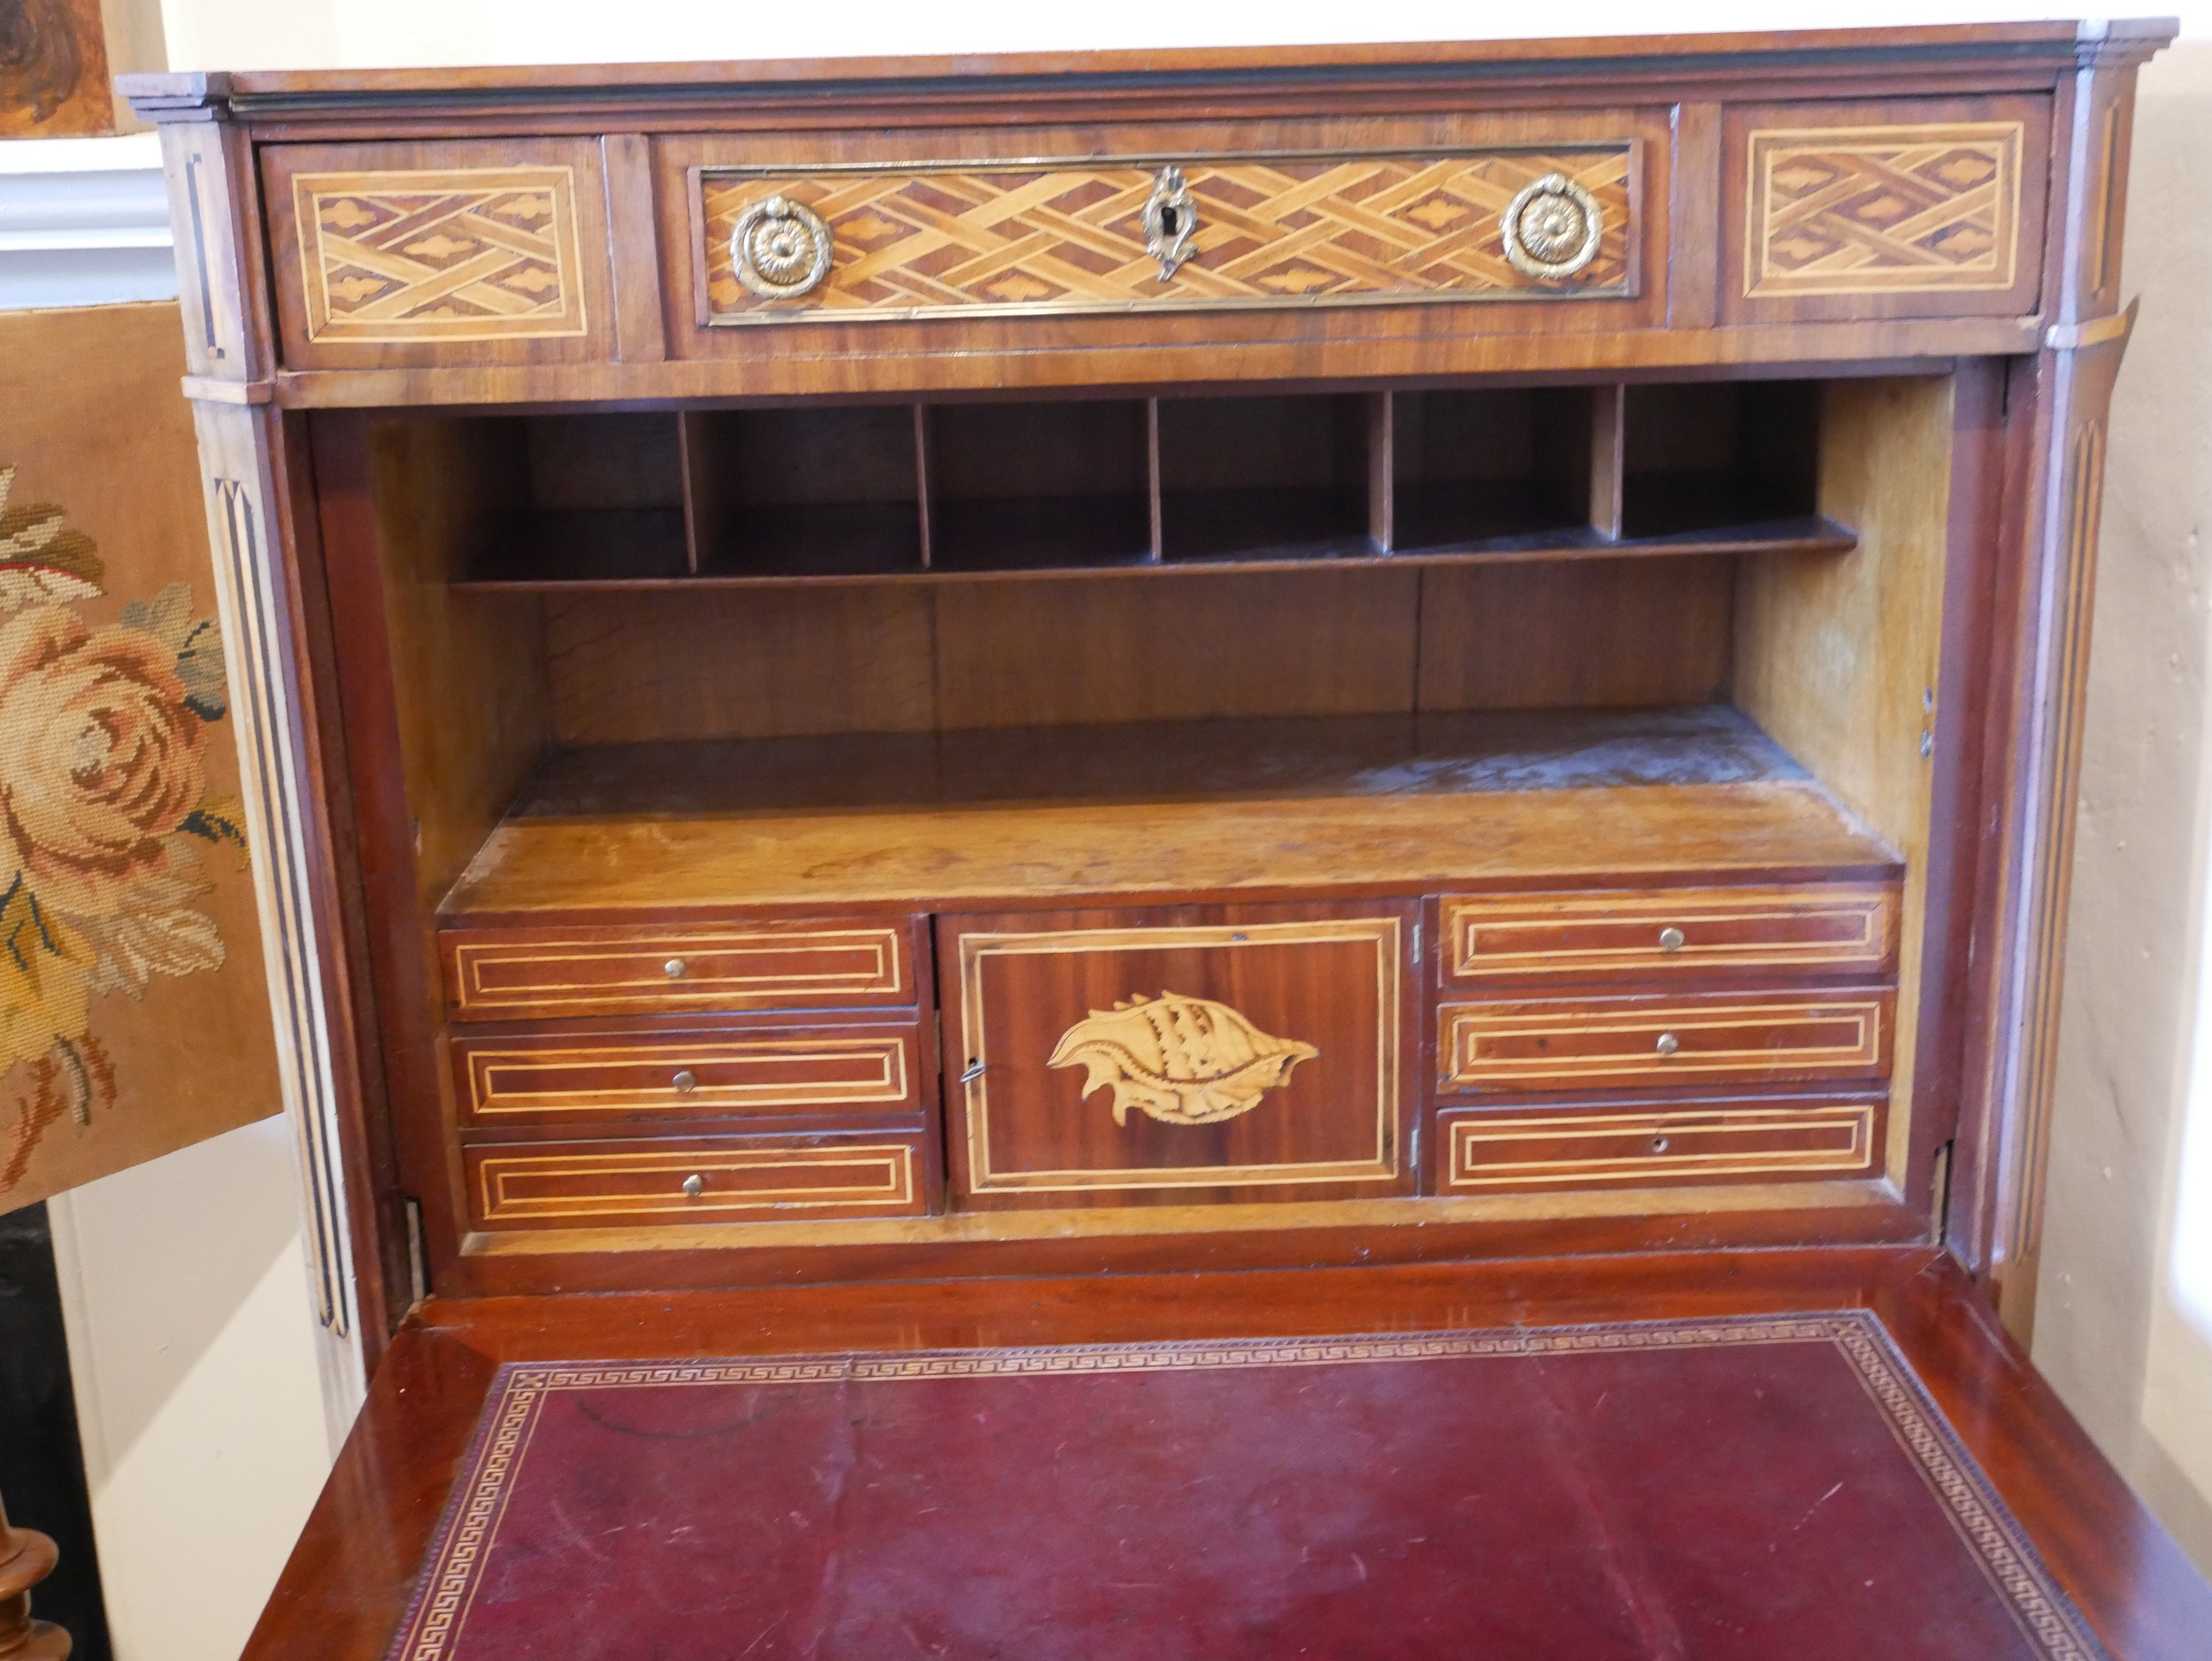 T. WILLSON OF QUEEN STREET, LONDON, A FINE EARLY 19TH CENTURY MAHOGANY AND SATINWOOD MARQUETRY - Bild 7 aus 12